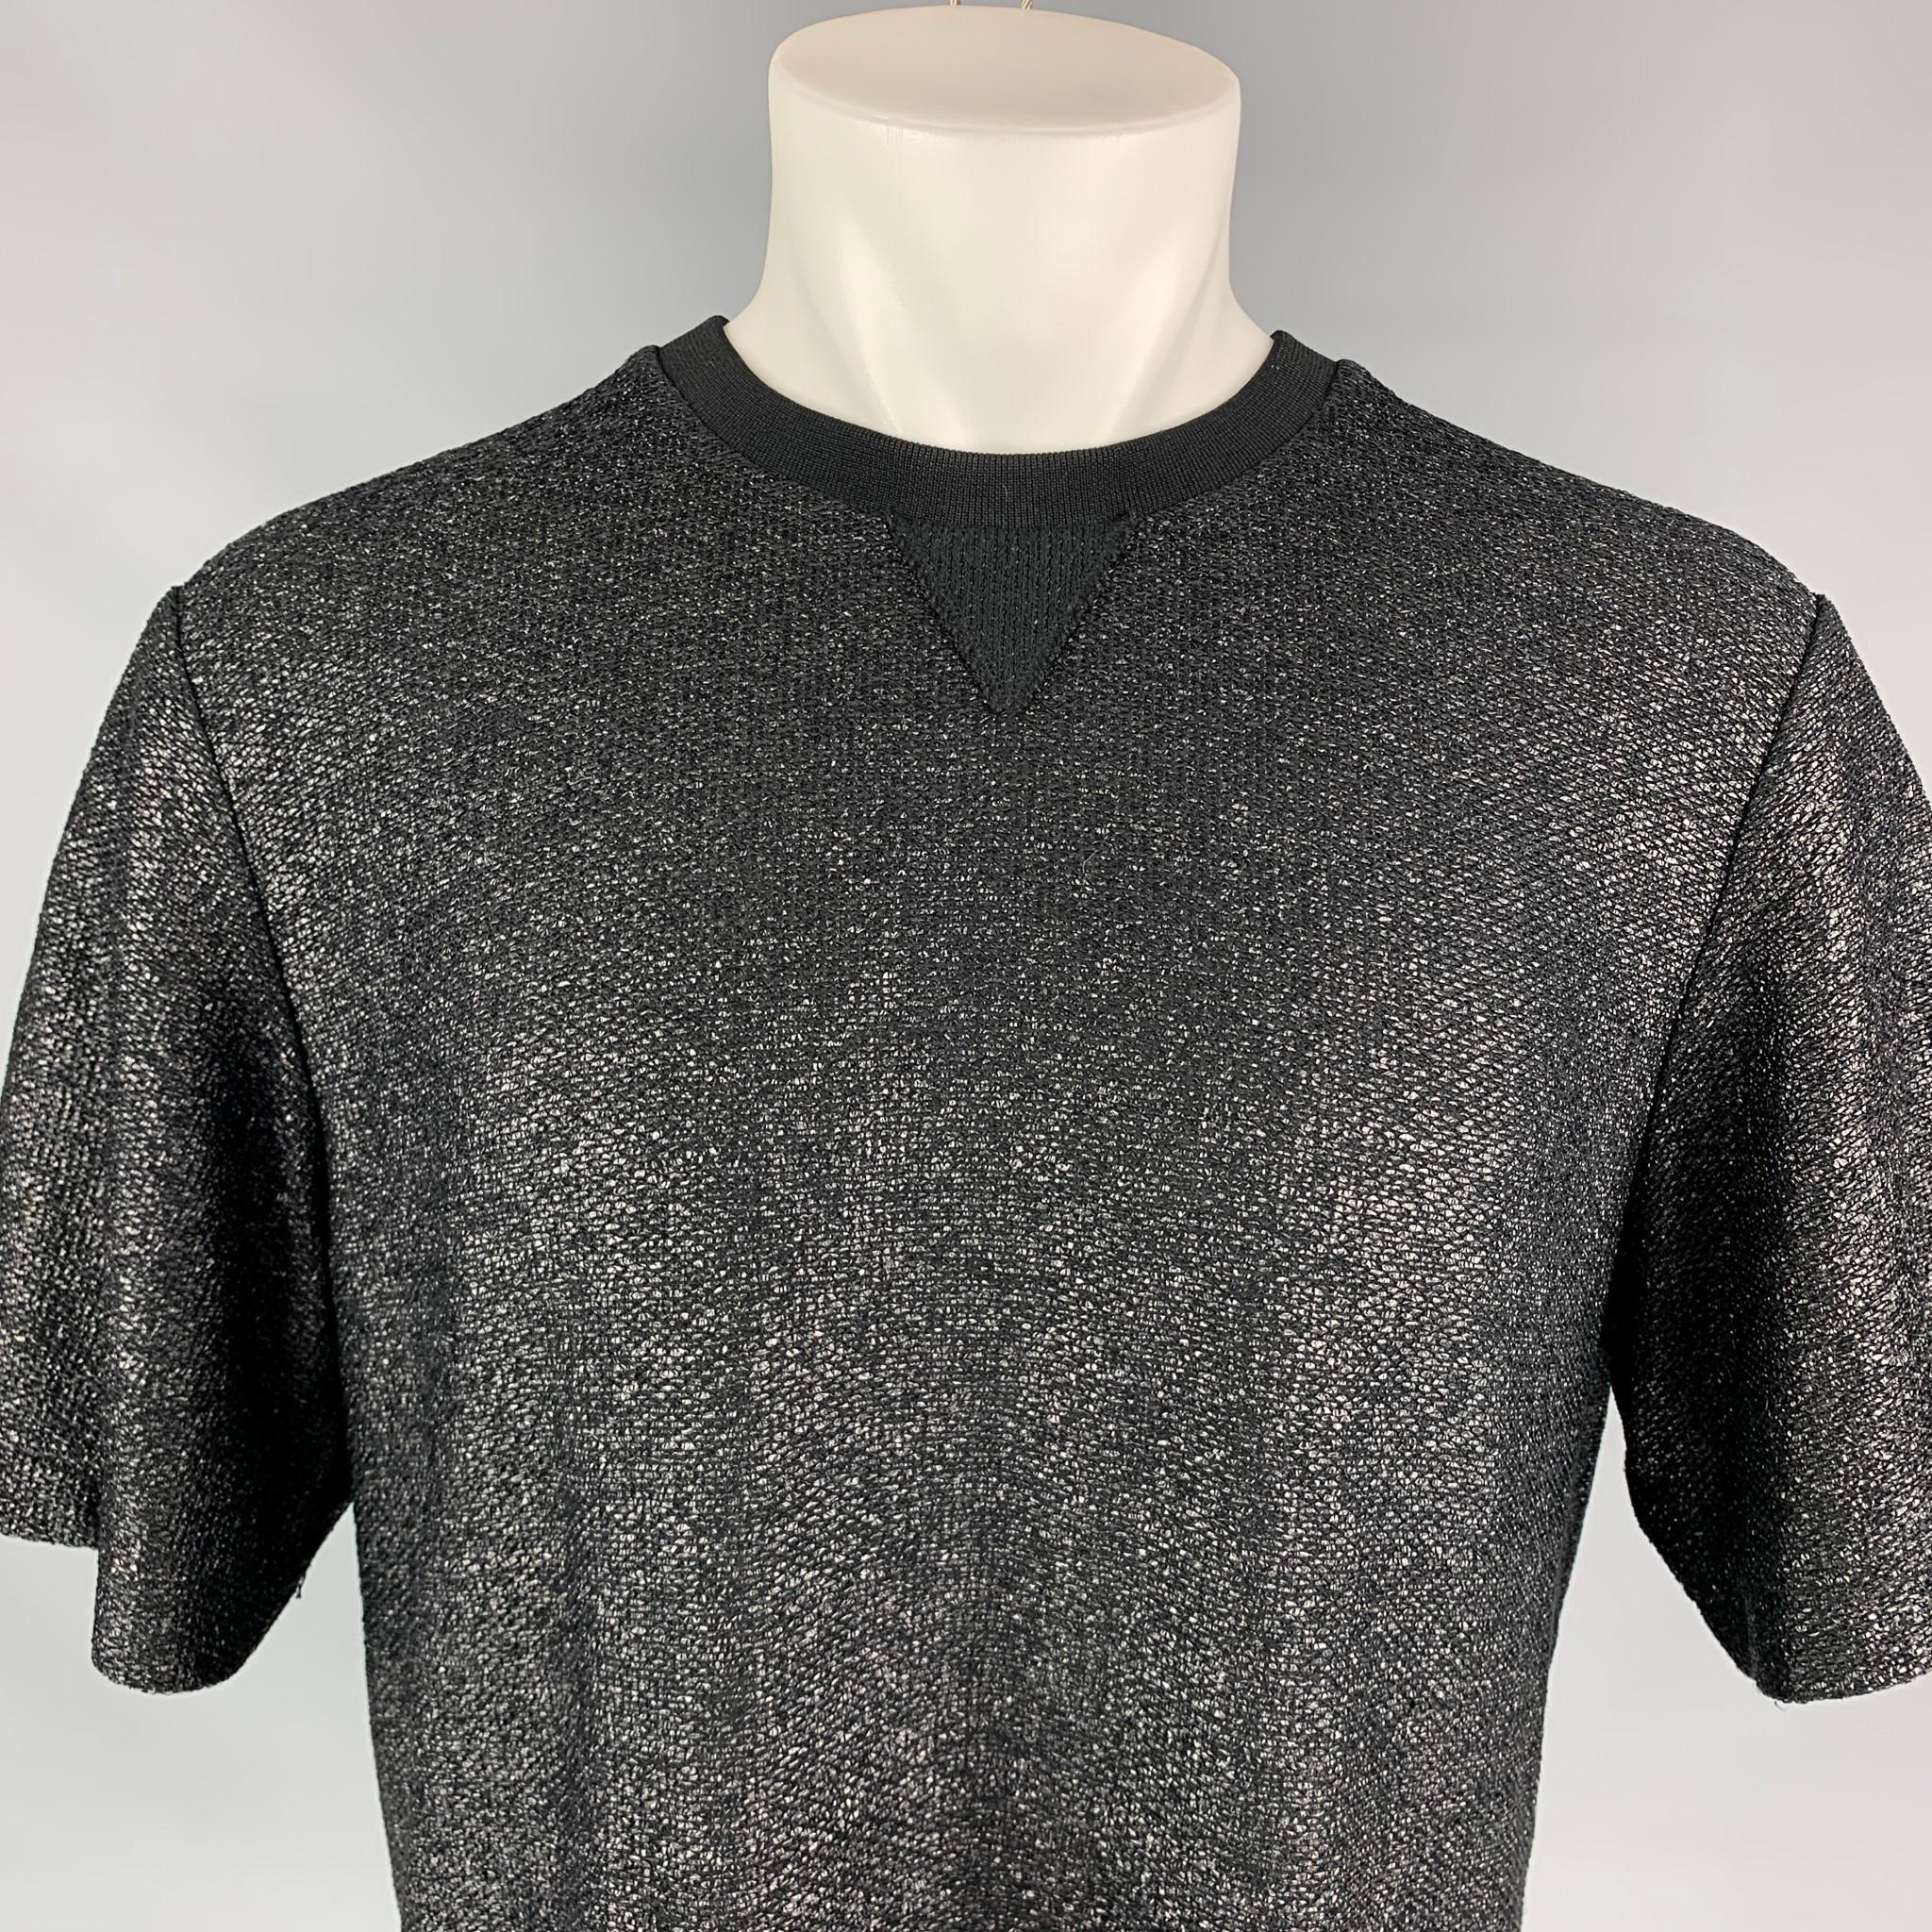 ALEXANDER WANG t-shirt comes in a black textured cotton / polyamide featuring a back ribbon trim and a crew-neck. 

Very Good Pre-Owned Condition.
Marked: 50

Measurements:

Shoulder: 19.5 in.
Chest: 44 in.
Sleeve: 11.5 in.
Length: 30 in. 
SKU: